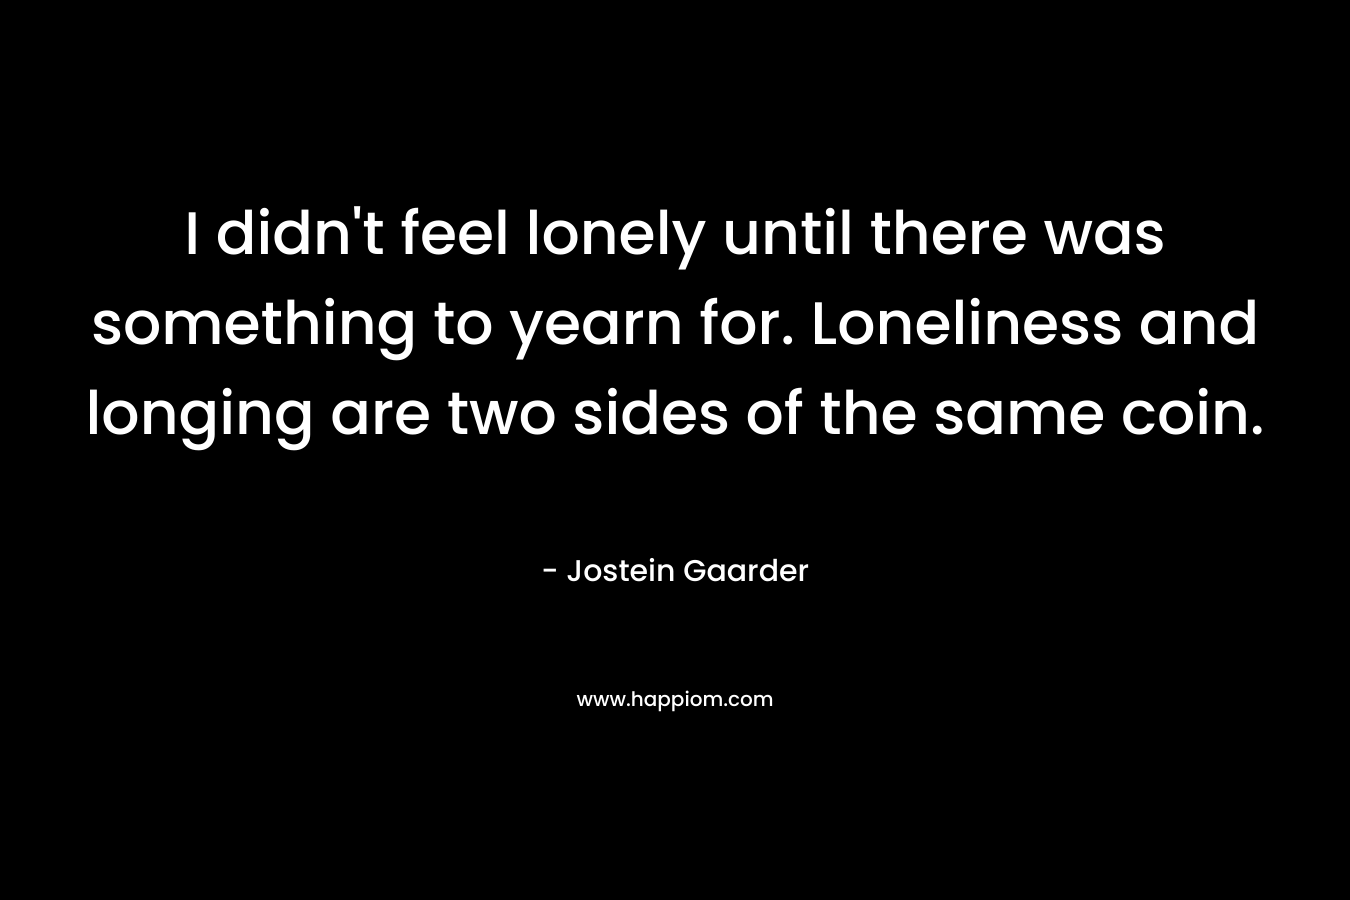 I didn’t feel lonely until there was something to yearn for. Loneliness and longing are two sides of the same coin. – Jostein Gaarder